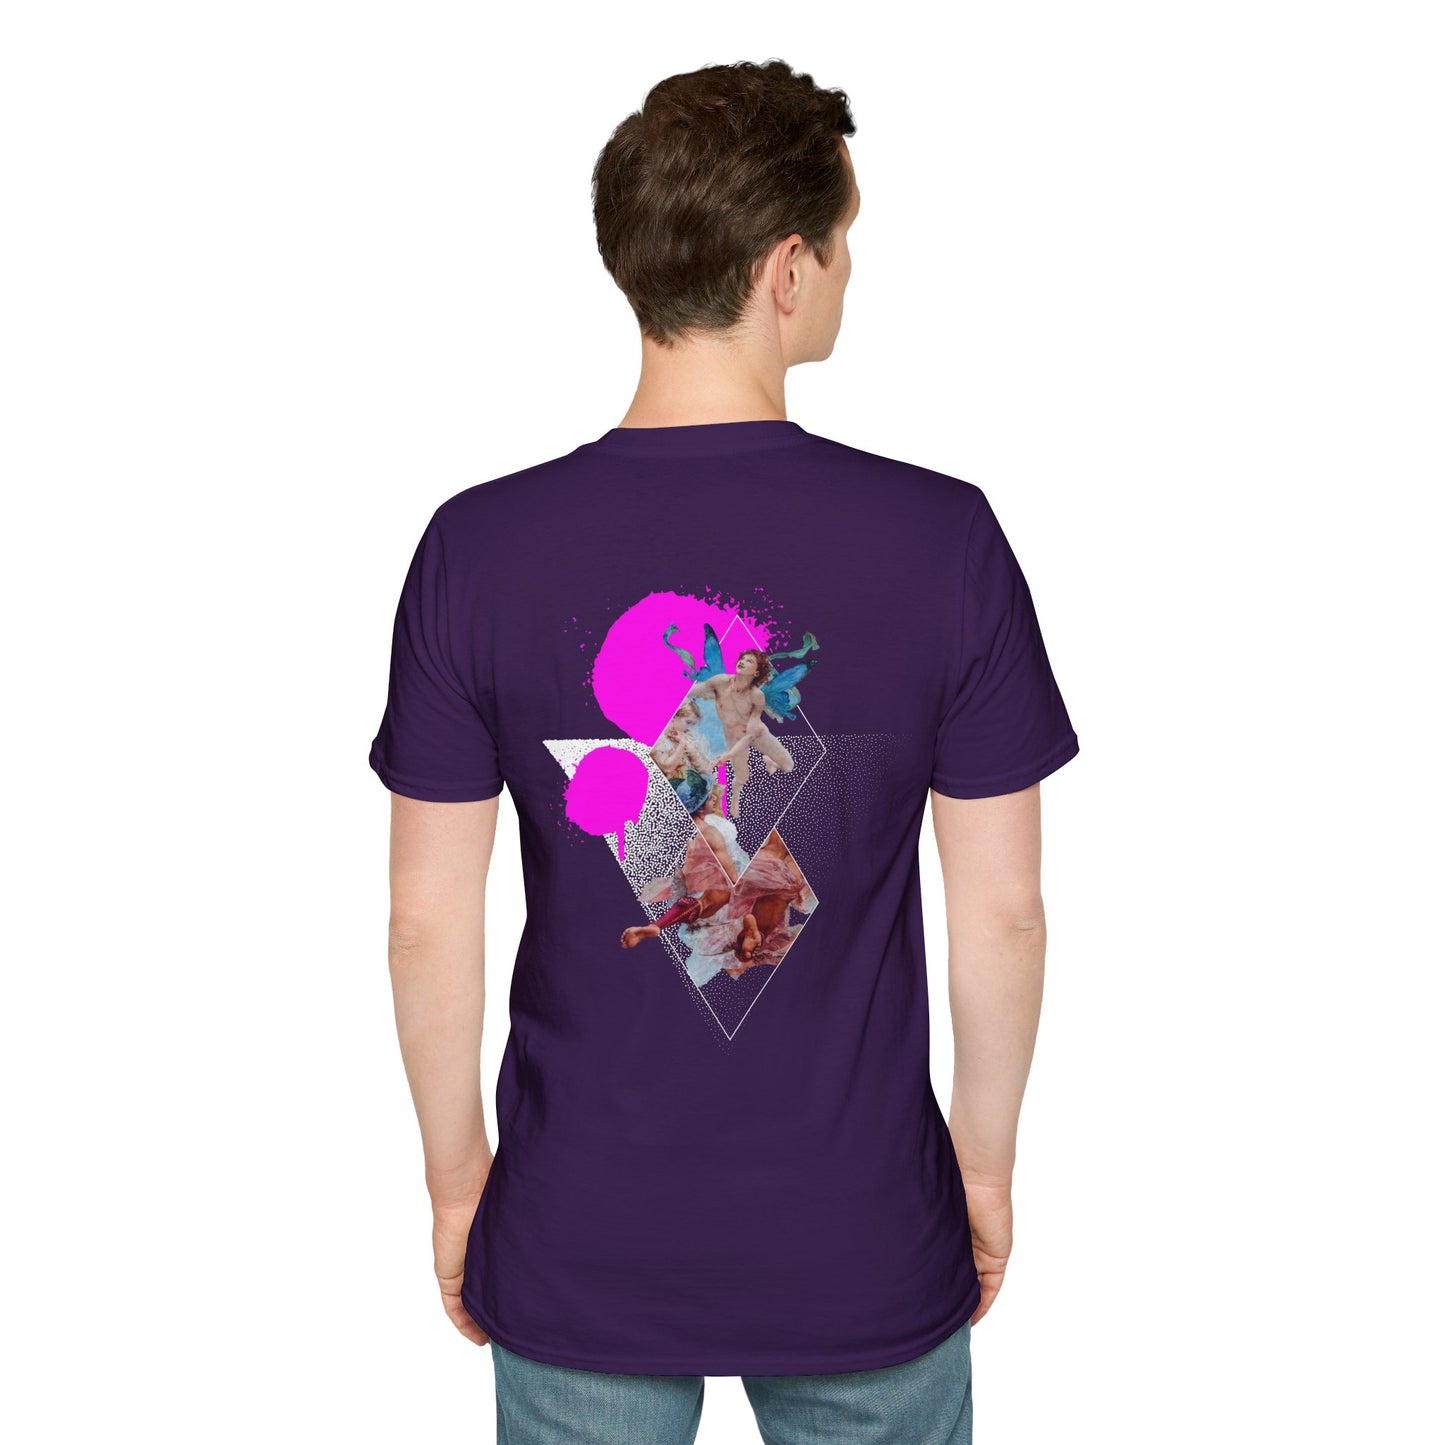 Violet T-shirt with a surreal collage of butterflies in spray paint design